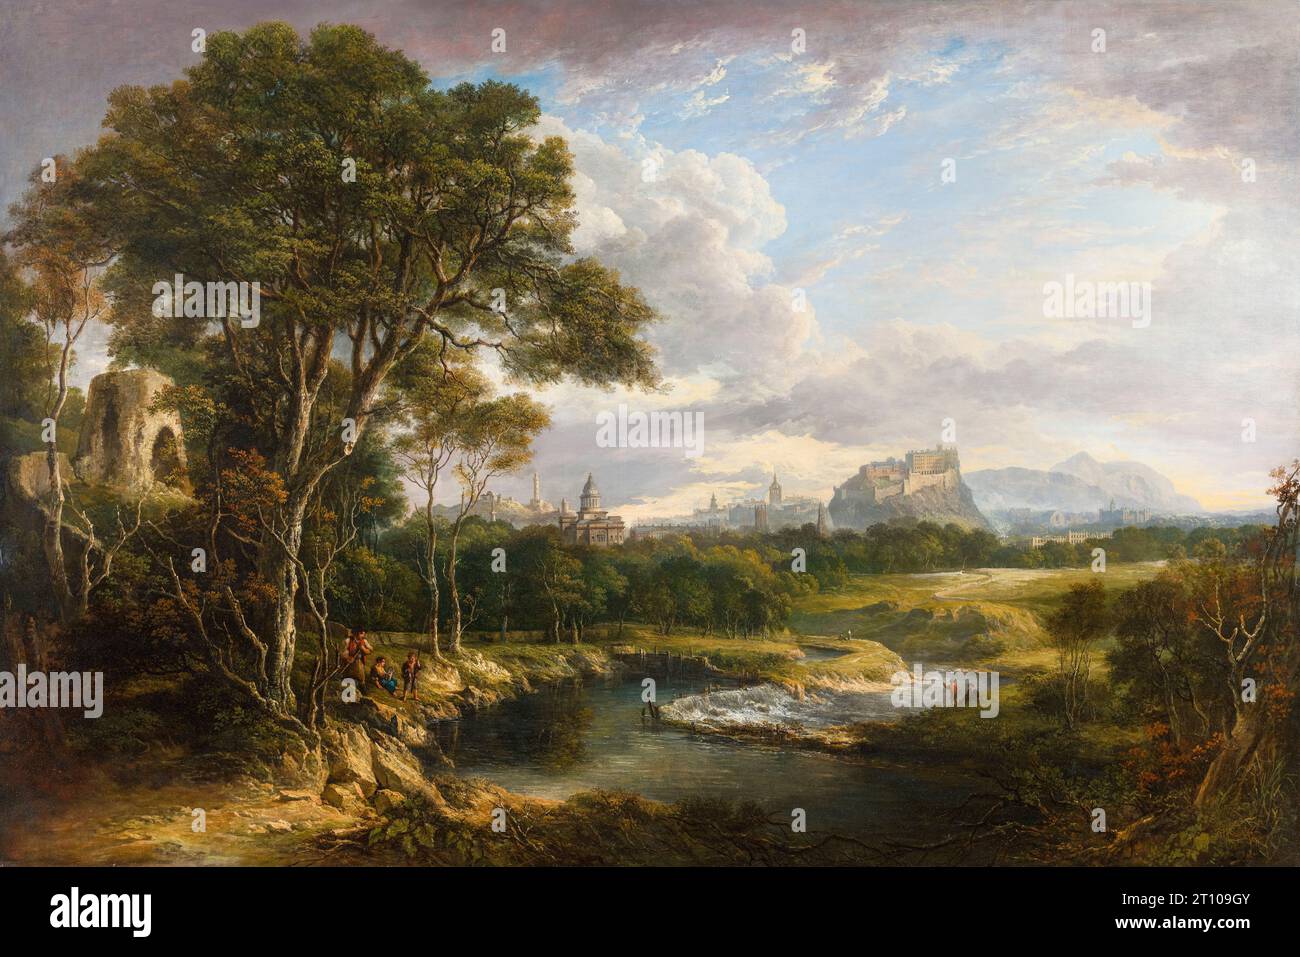 View of the City of Edinburgh, landscape painting in oil on canvas by Alexander Nasmyth, circa 1822 Stock Photo